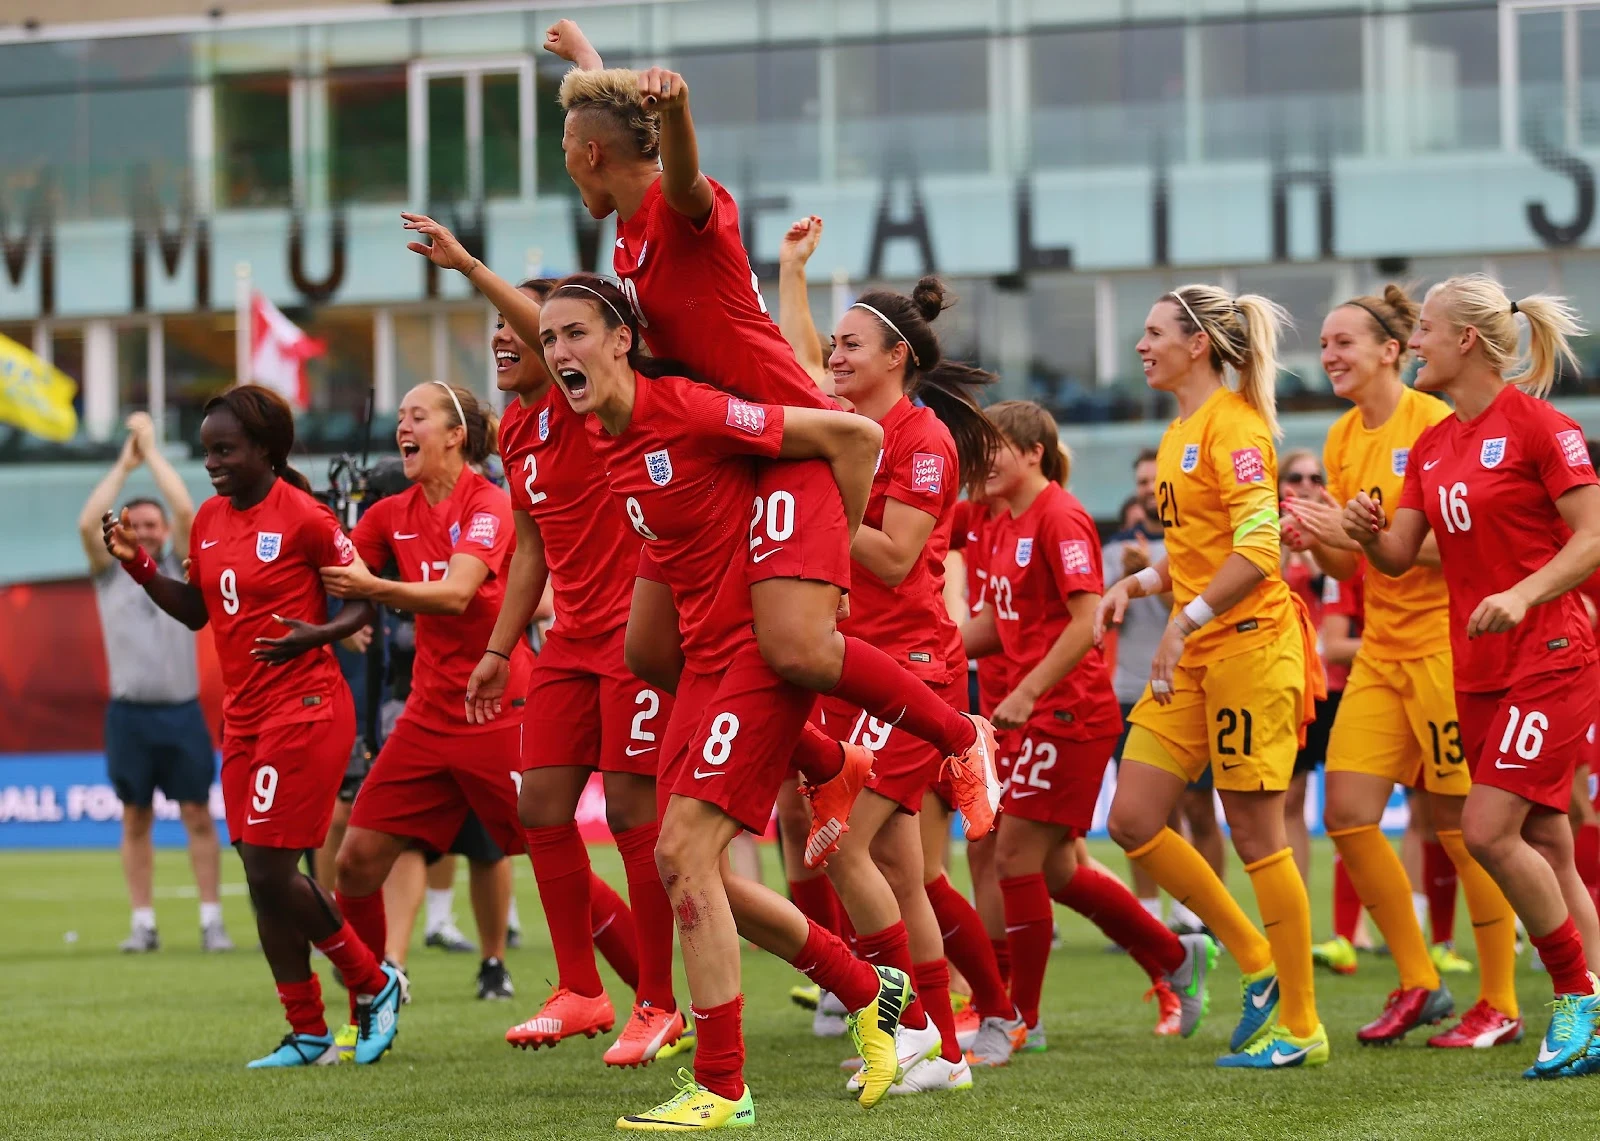 England players celebrating their win in the FIFA Women's World Cup 2015 third place play-off match between Germany and England.